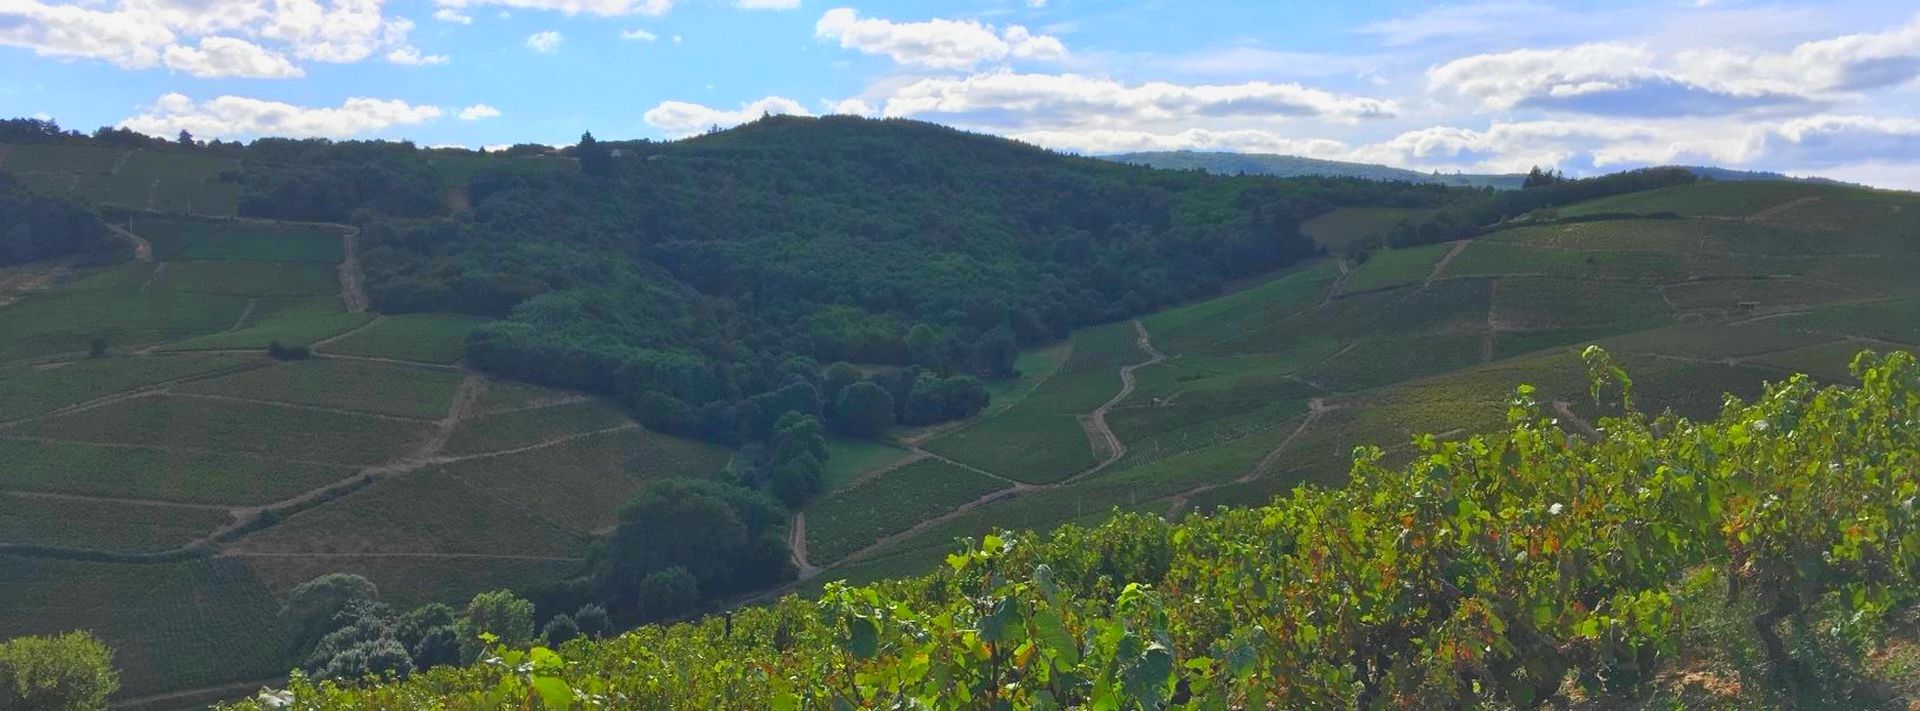 Beaujolais: the finest AOC wines – Full day